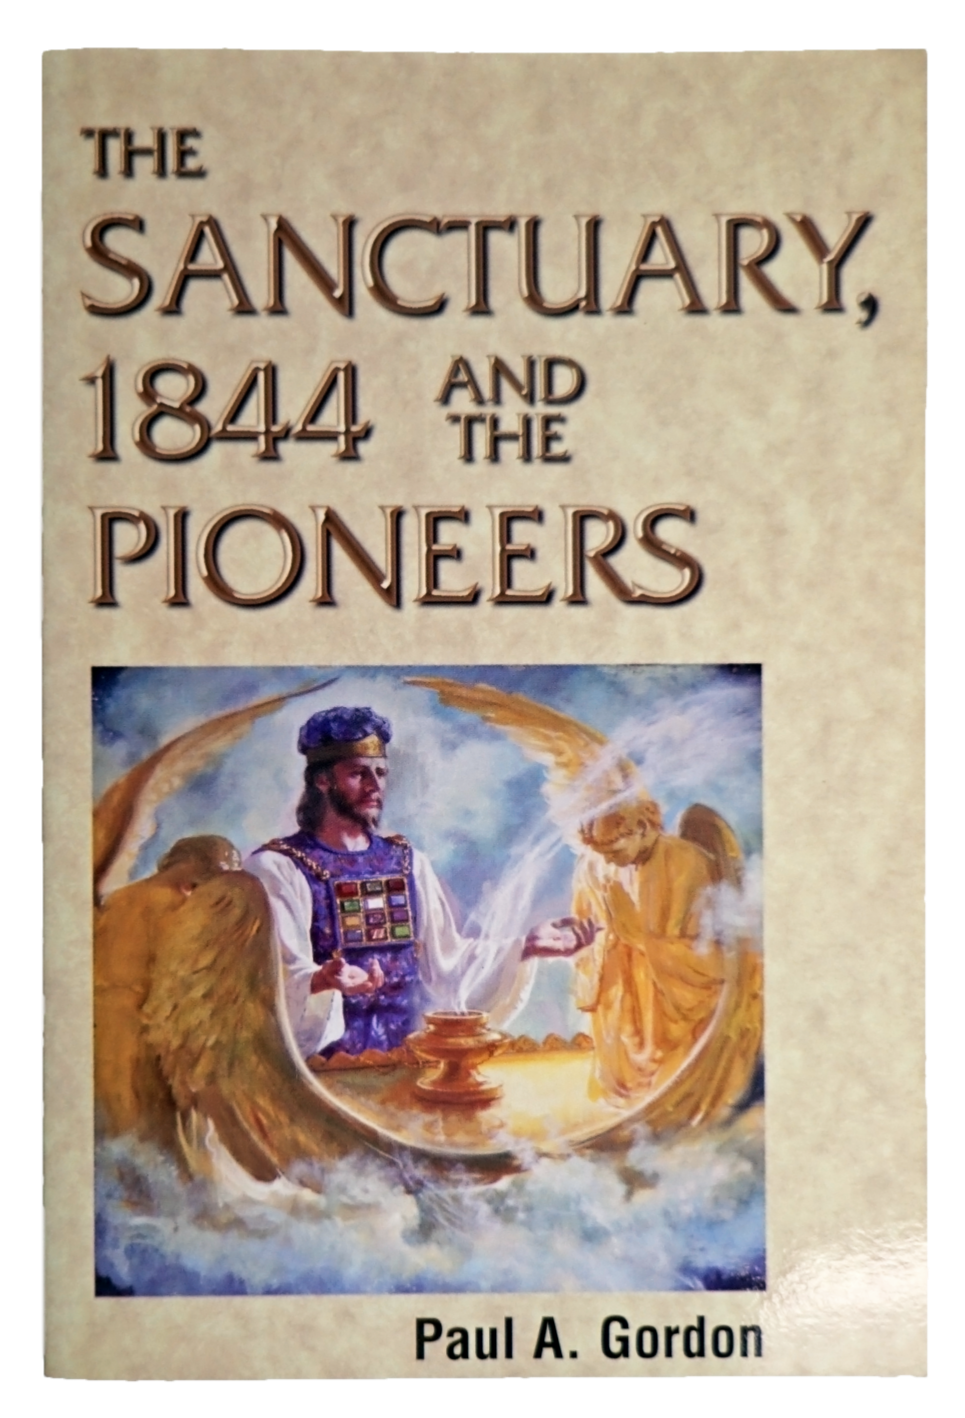 The Sanctuary, 1844 and The Pioneers